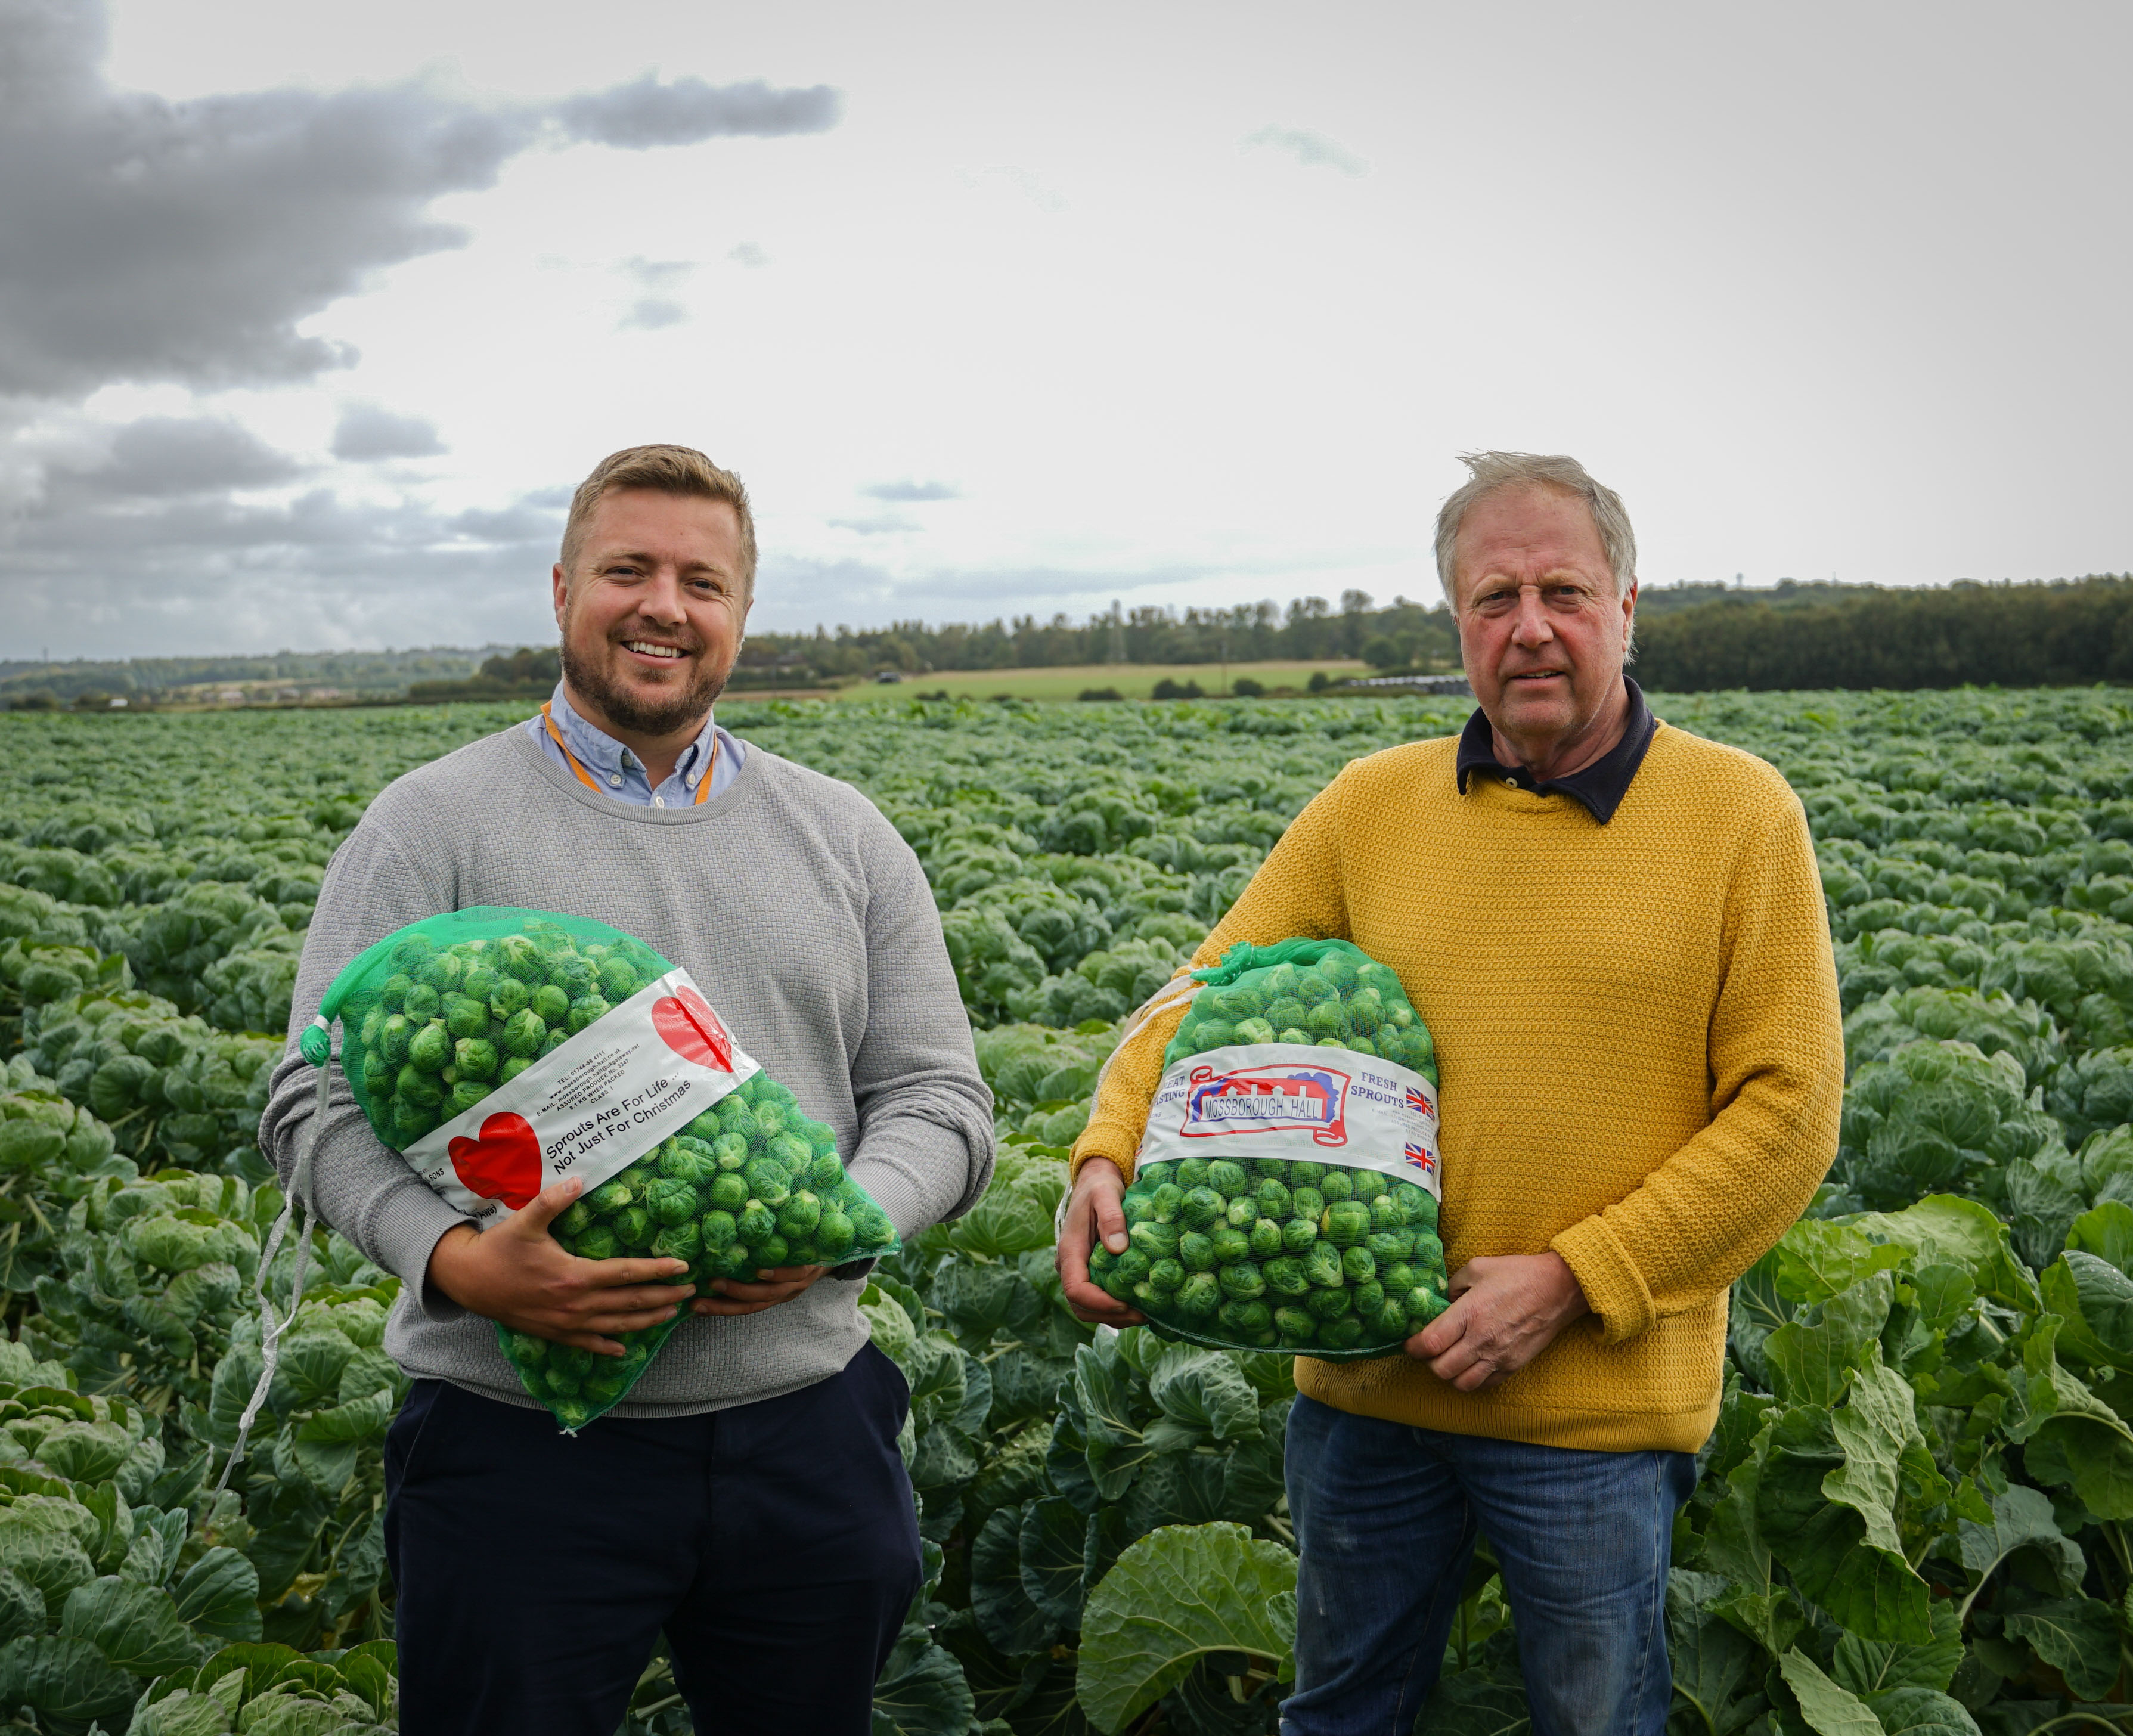 ‘Tis the season for sprouts as James Hall & Co. Ltd sources new supplier for SPAR stores